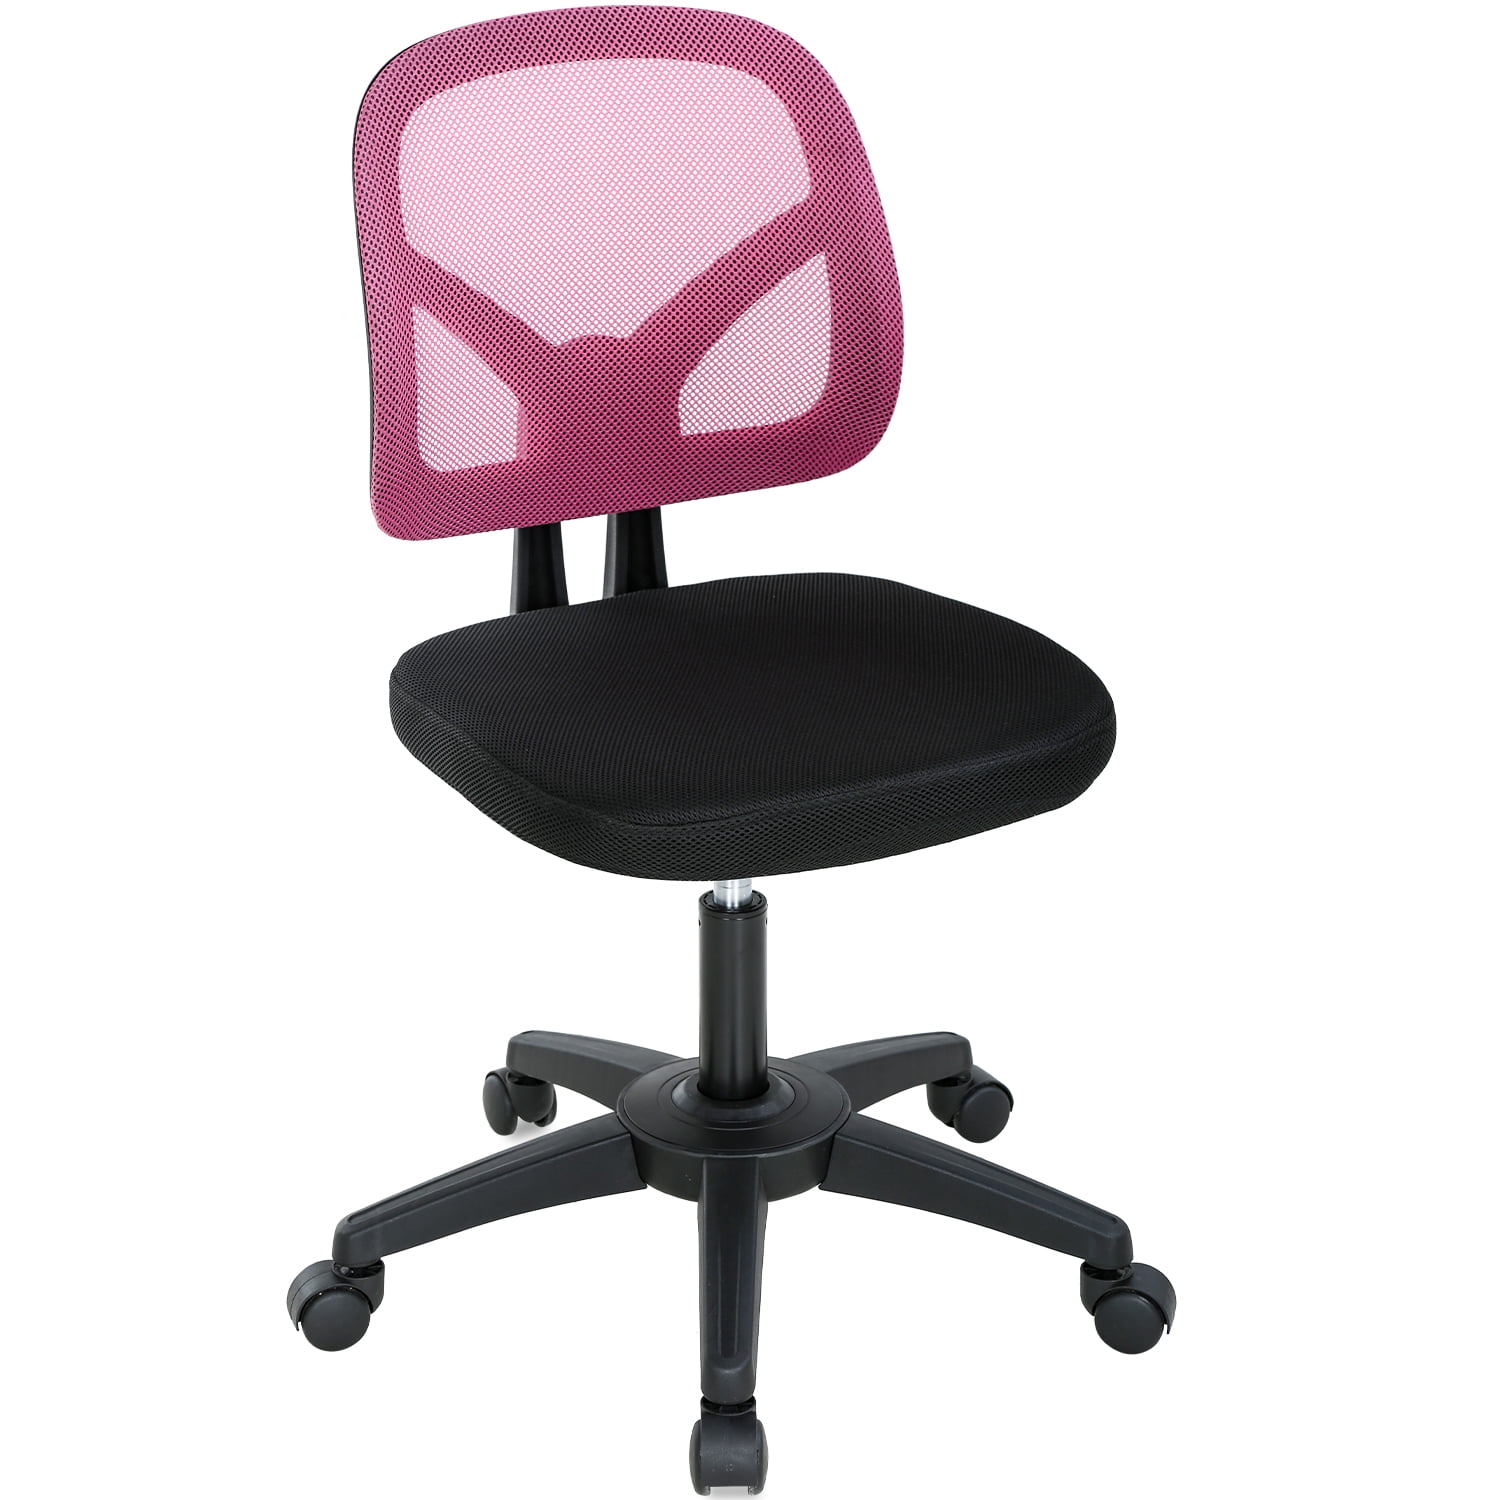 desk chairs for girls